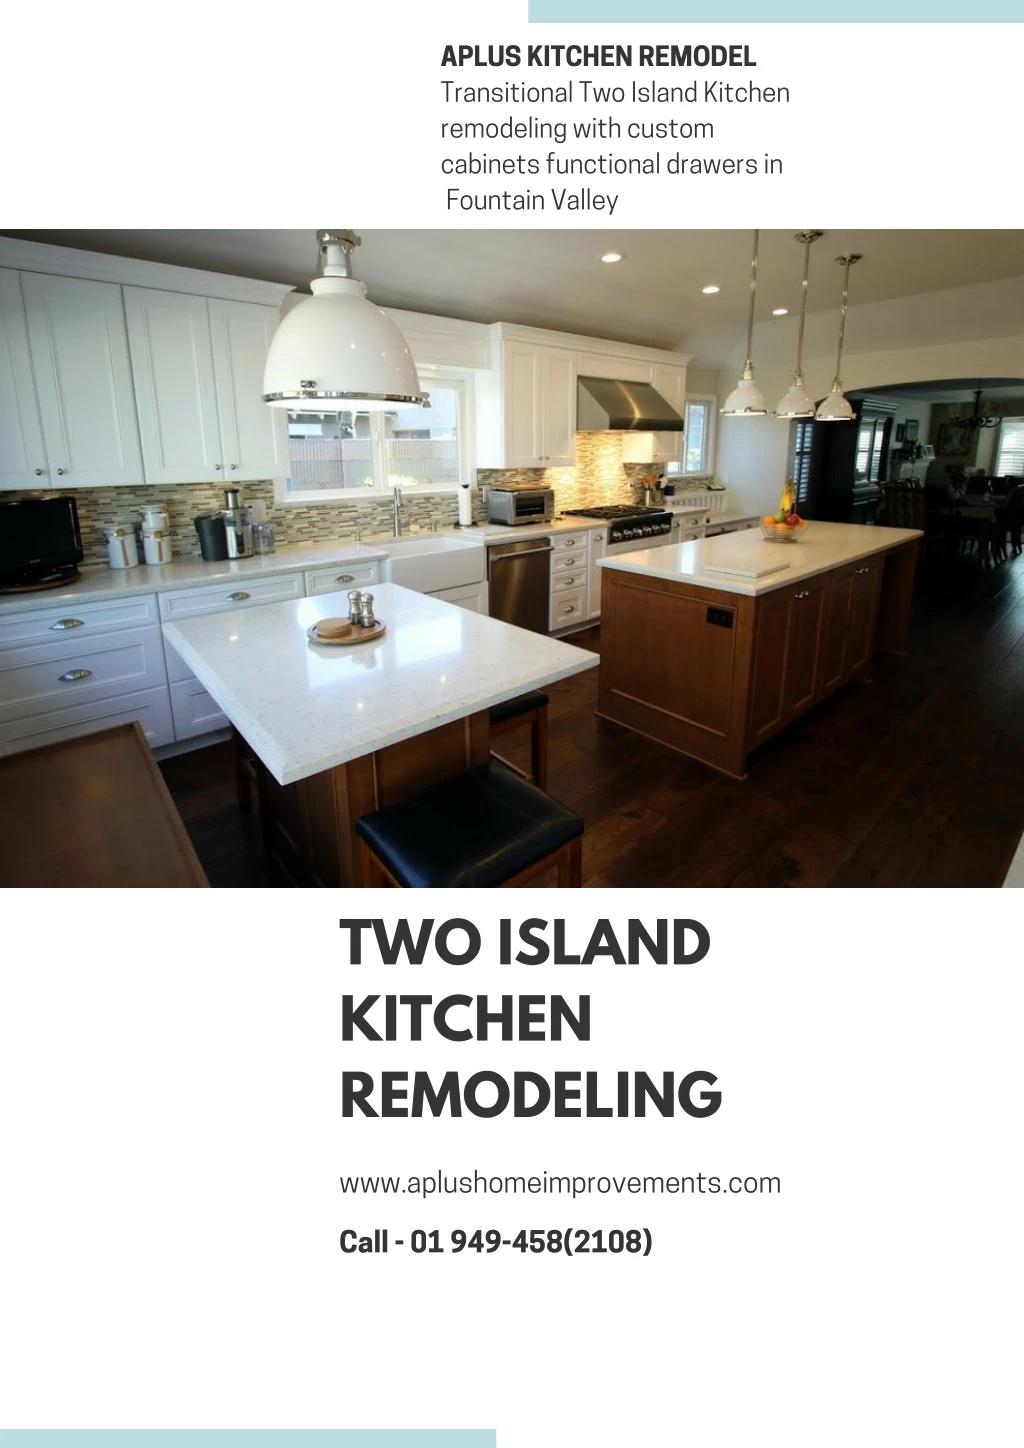 aplus kitchen remodel transitional two island